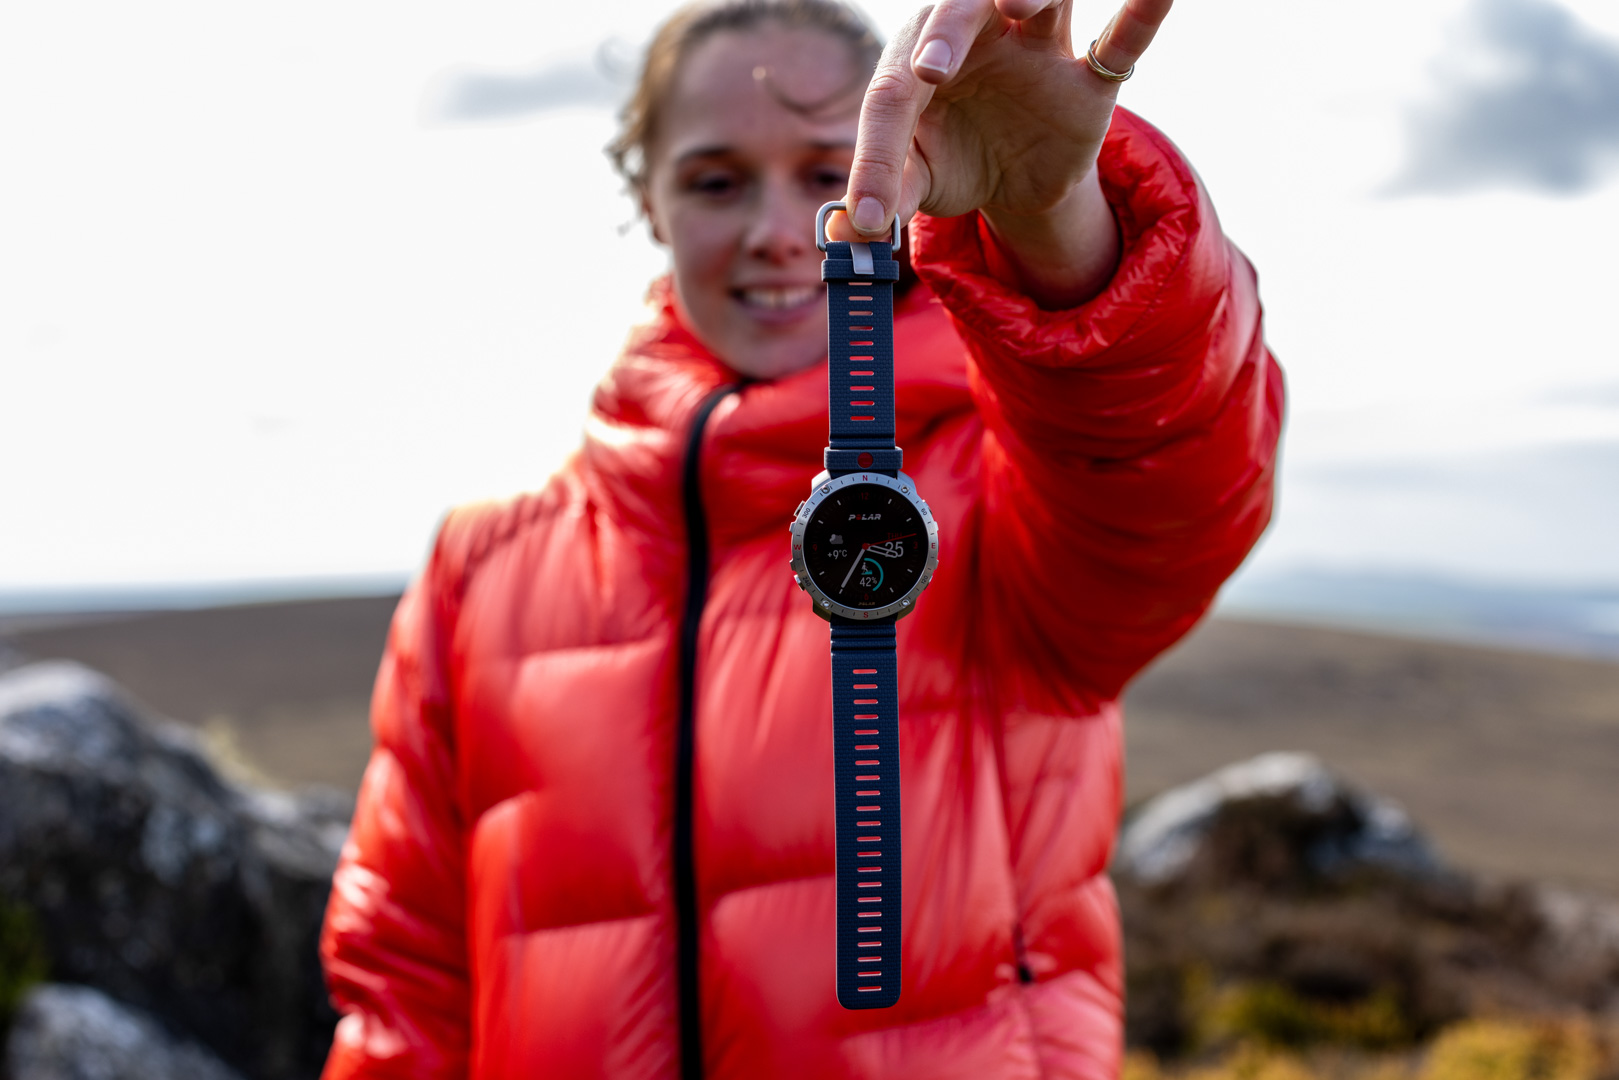 Polar Grit X2 Pro Watch: Impressive Battery Life and Advanced Features for Outdoor Enthusiasts